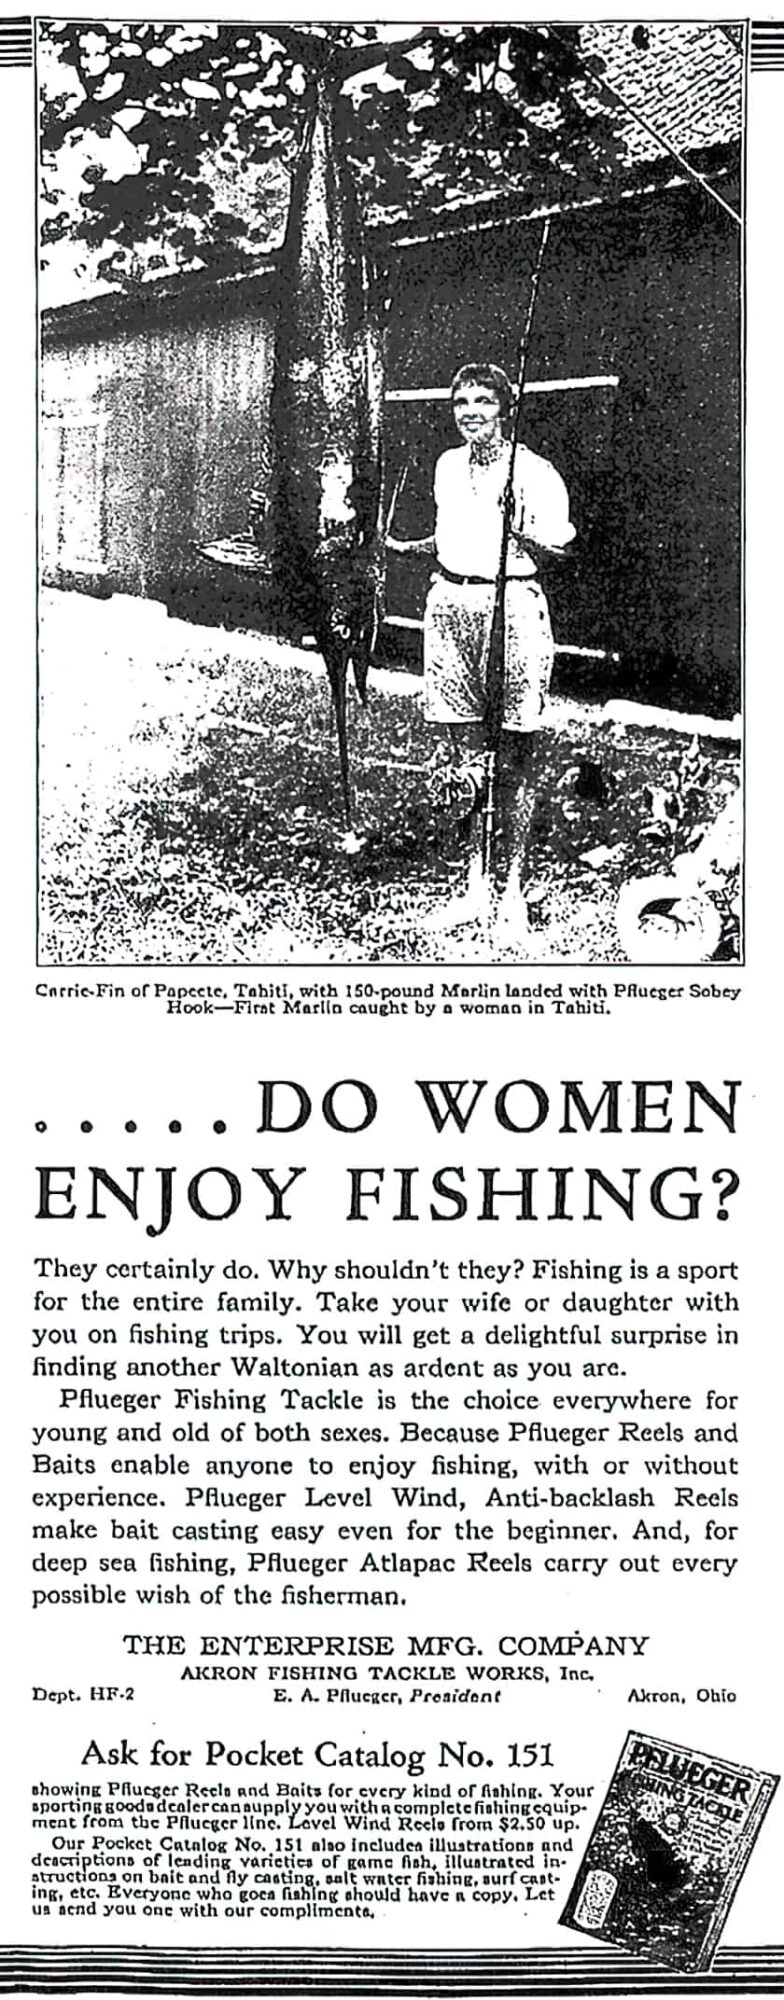 This advertisement from Hunting & Fishing Magazine February 1932 combats the idea that fishing is for men, in the hopes of selling more equipment. 